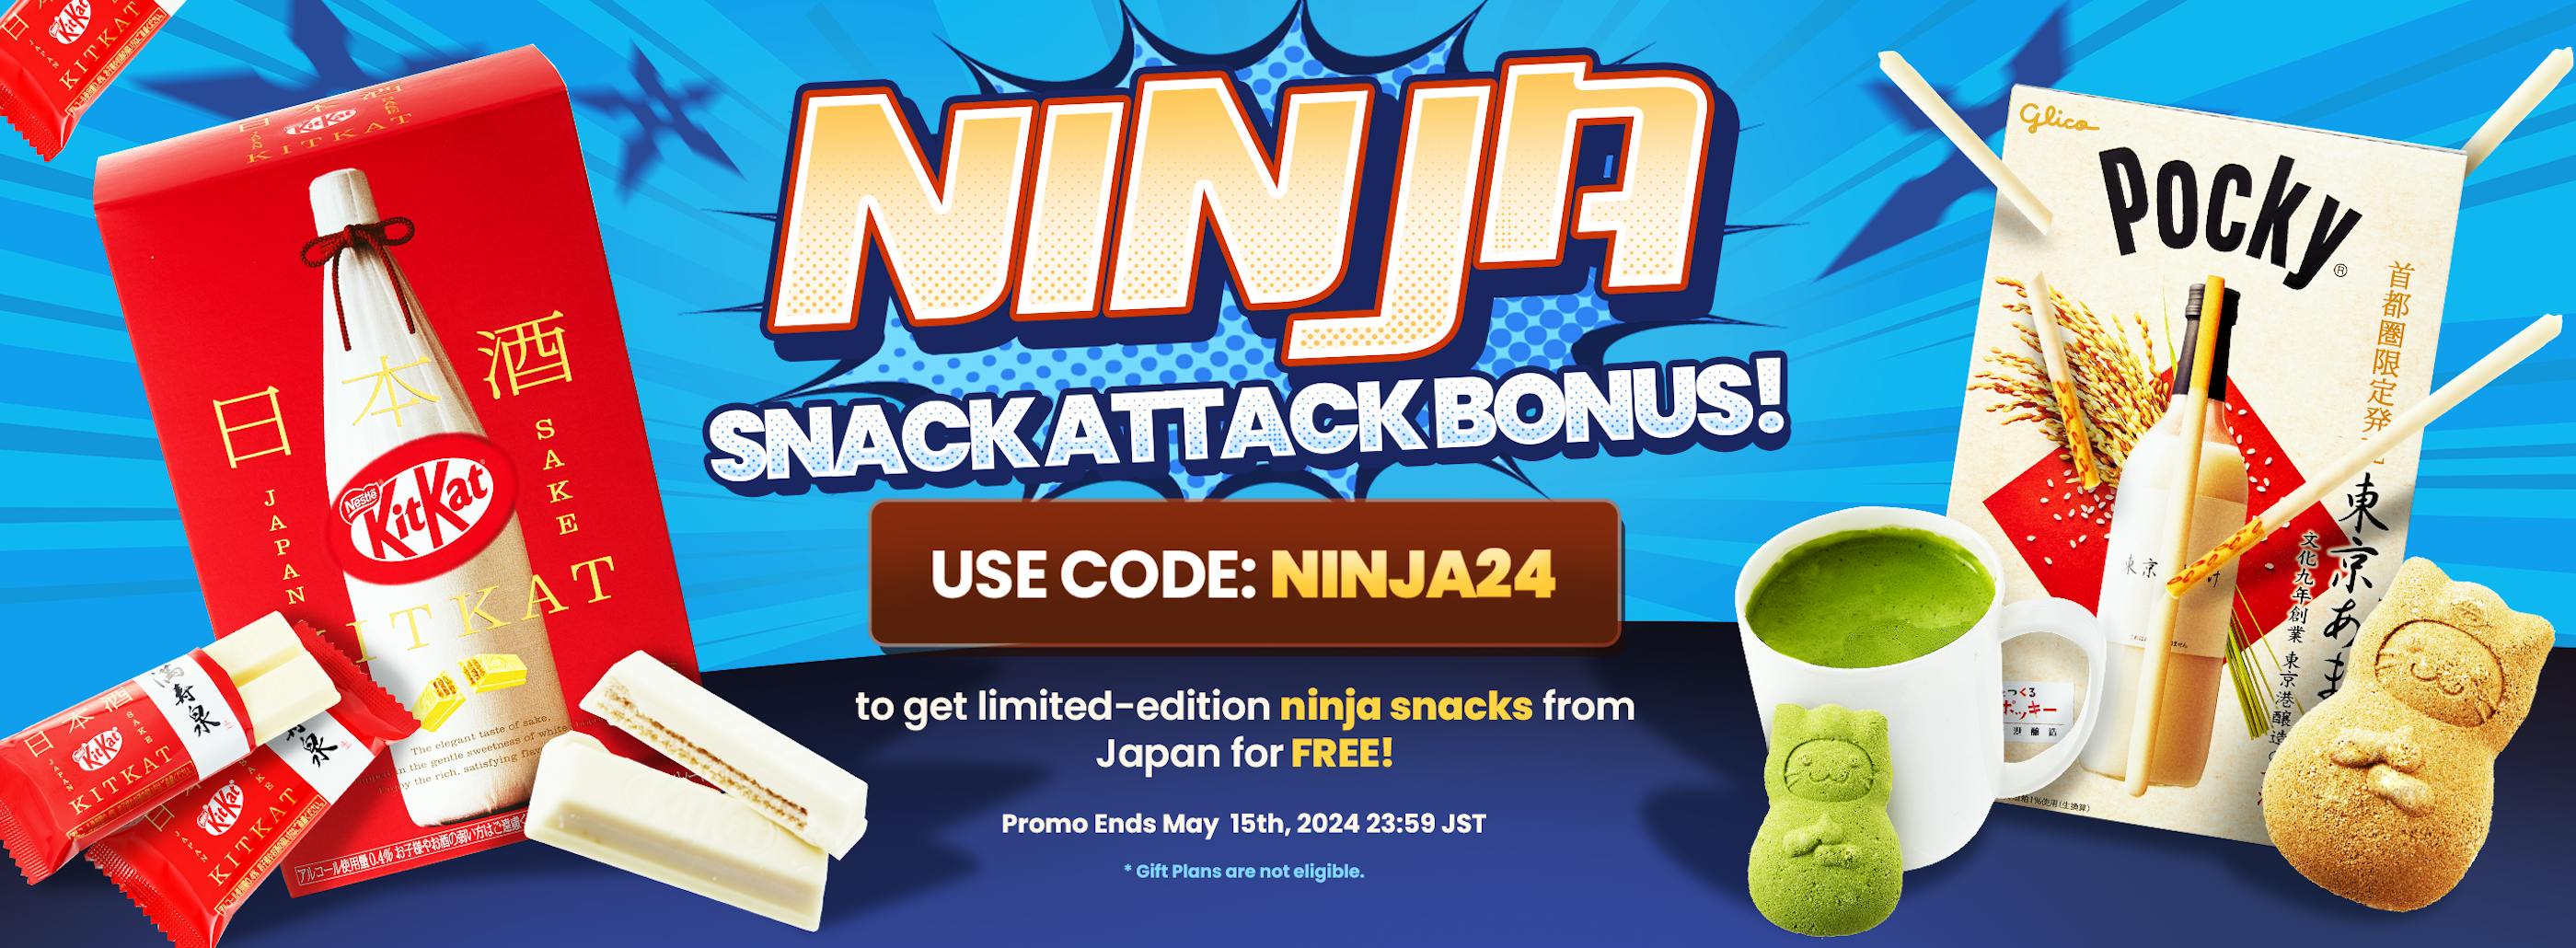 TokyoTreat's Ninja Snack Attack Bonus promotion with featured Japan-exclusive items.